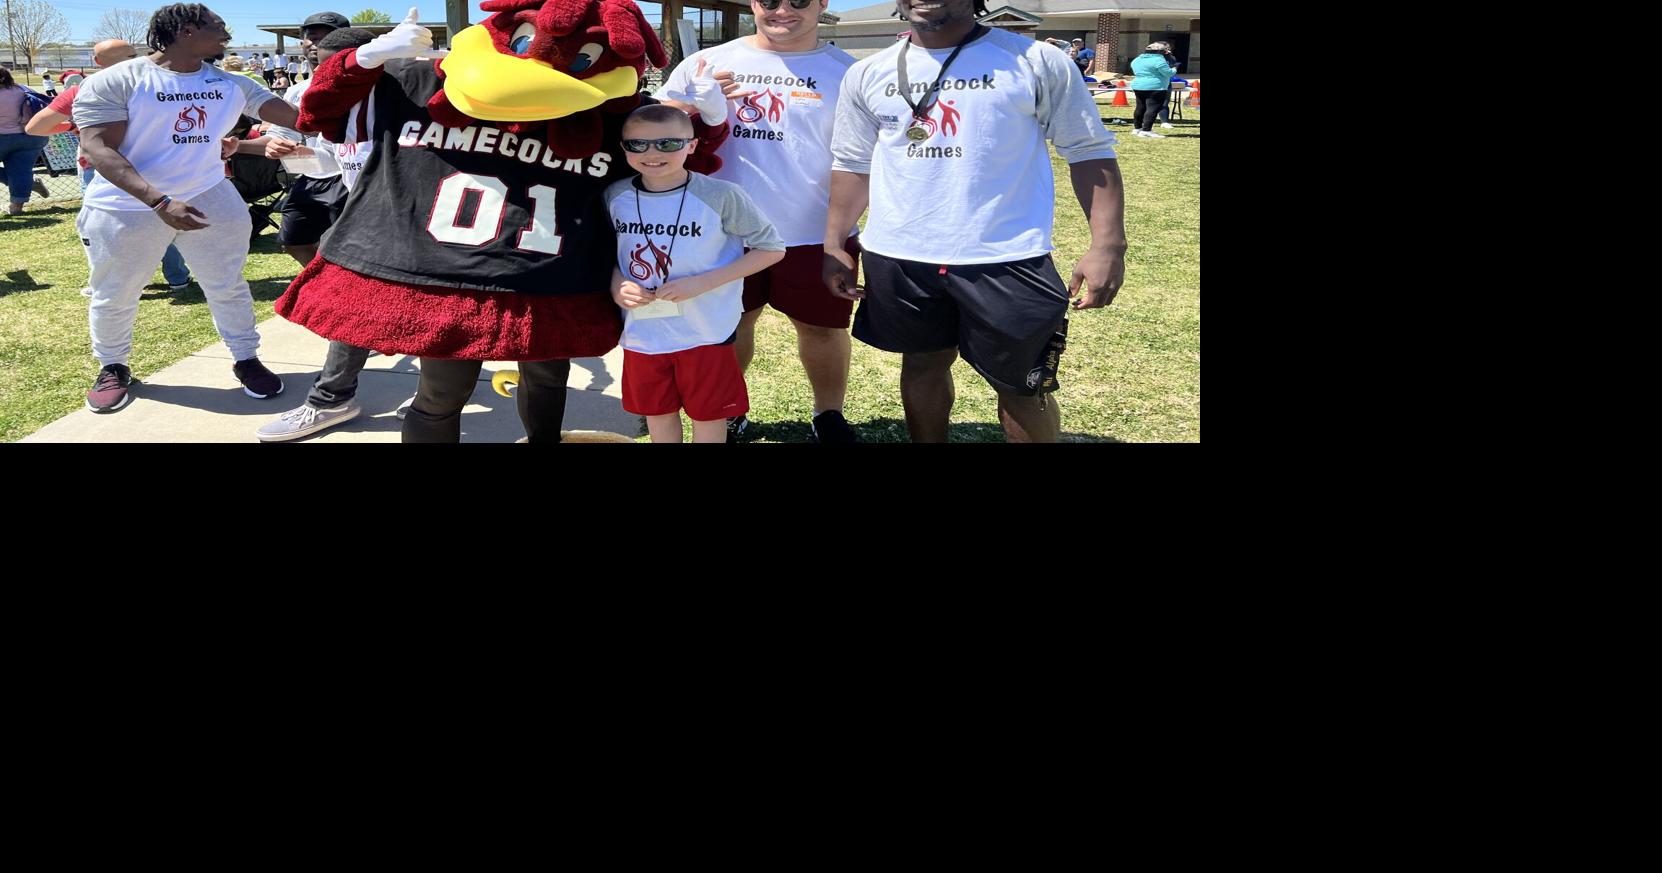 UofSC athletes team up with kids for Gamecock Games Columbia